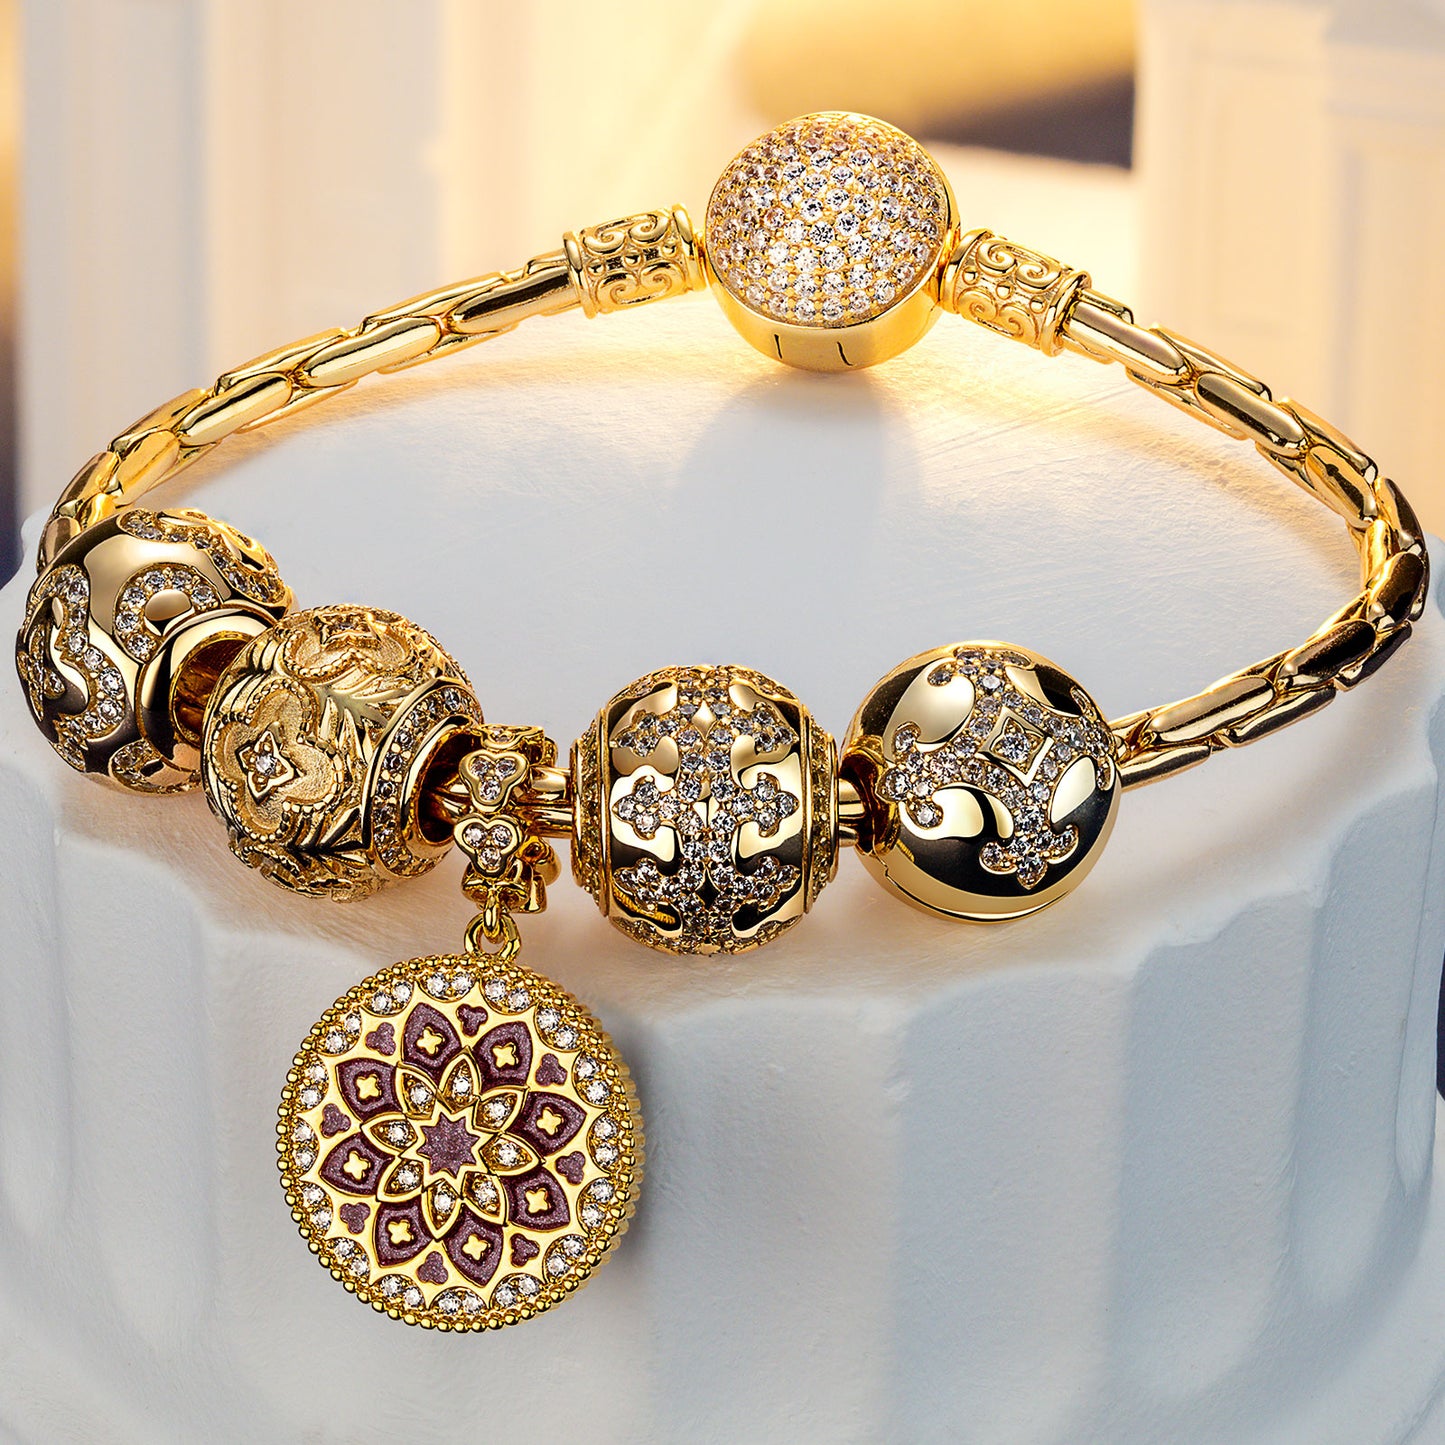 Sterling Silver Cascading Sunlight Charms Bracelet Set With Enamel In 14K Gold Plated